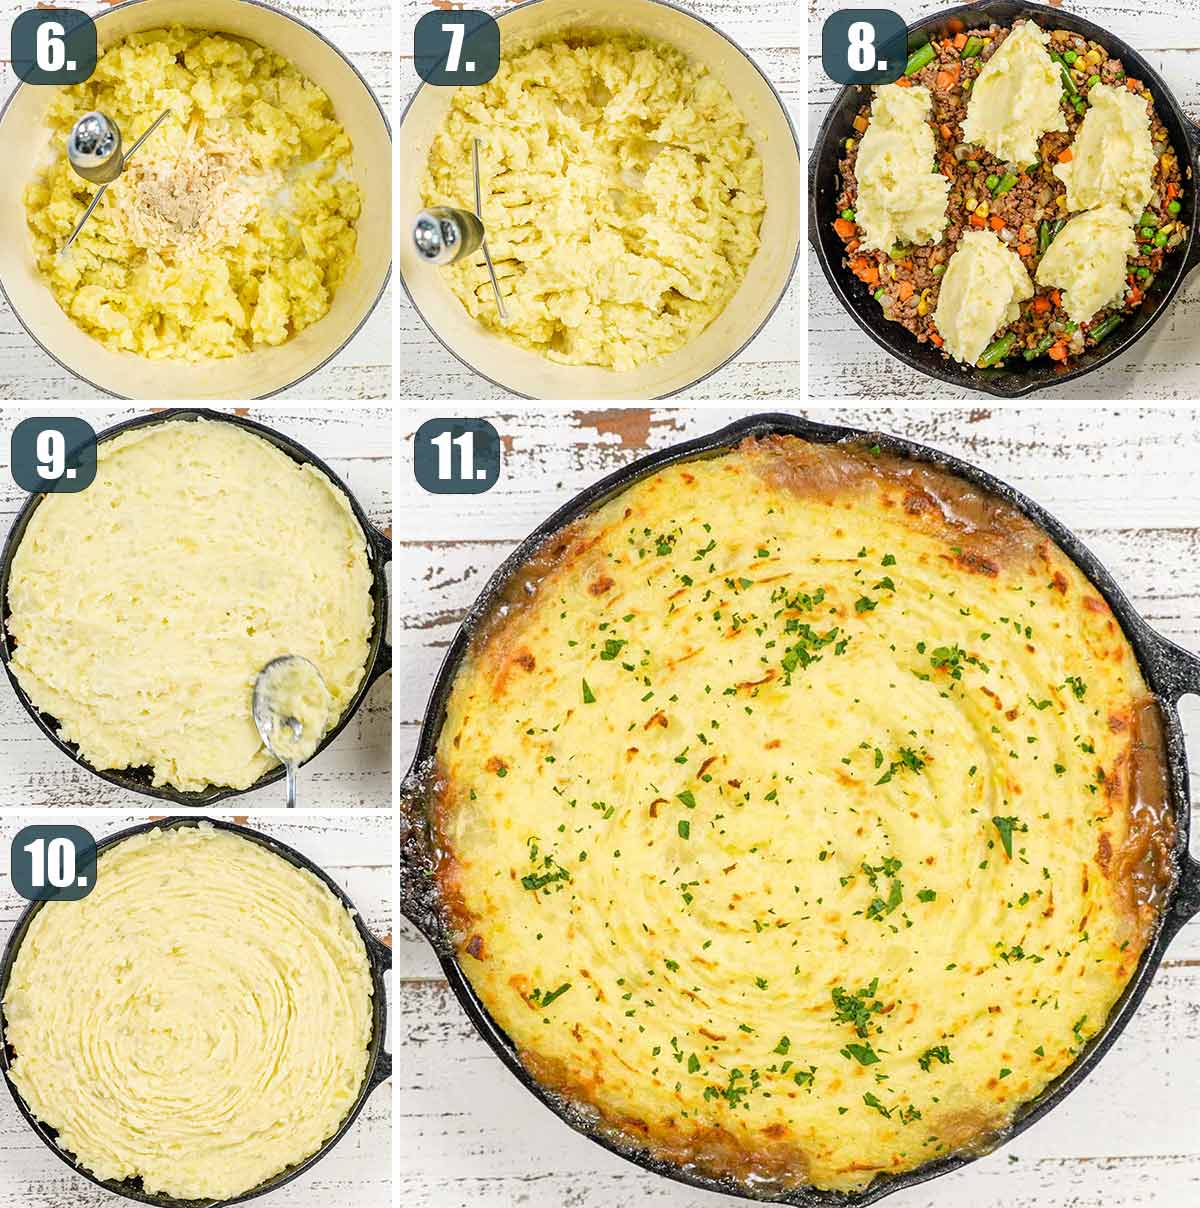 process shots showing how to make mashed potatoes and assemble shepherd's pie in a skillet.